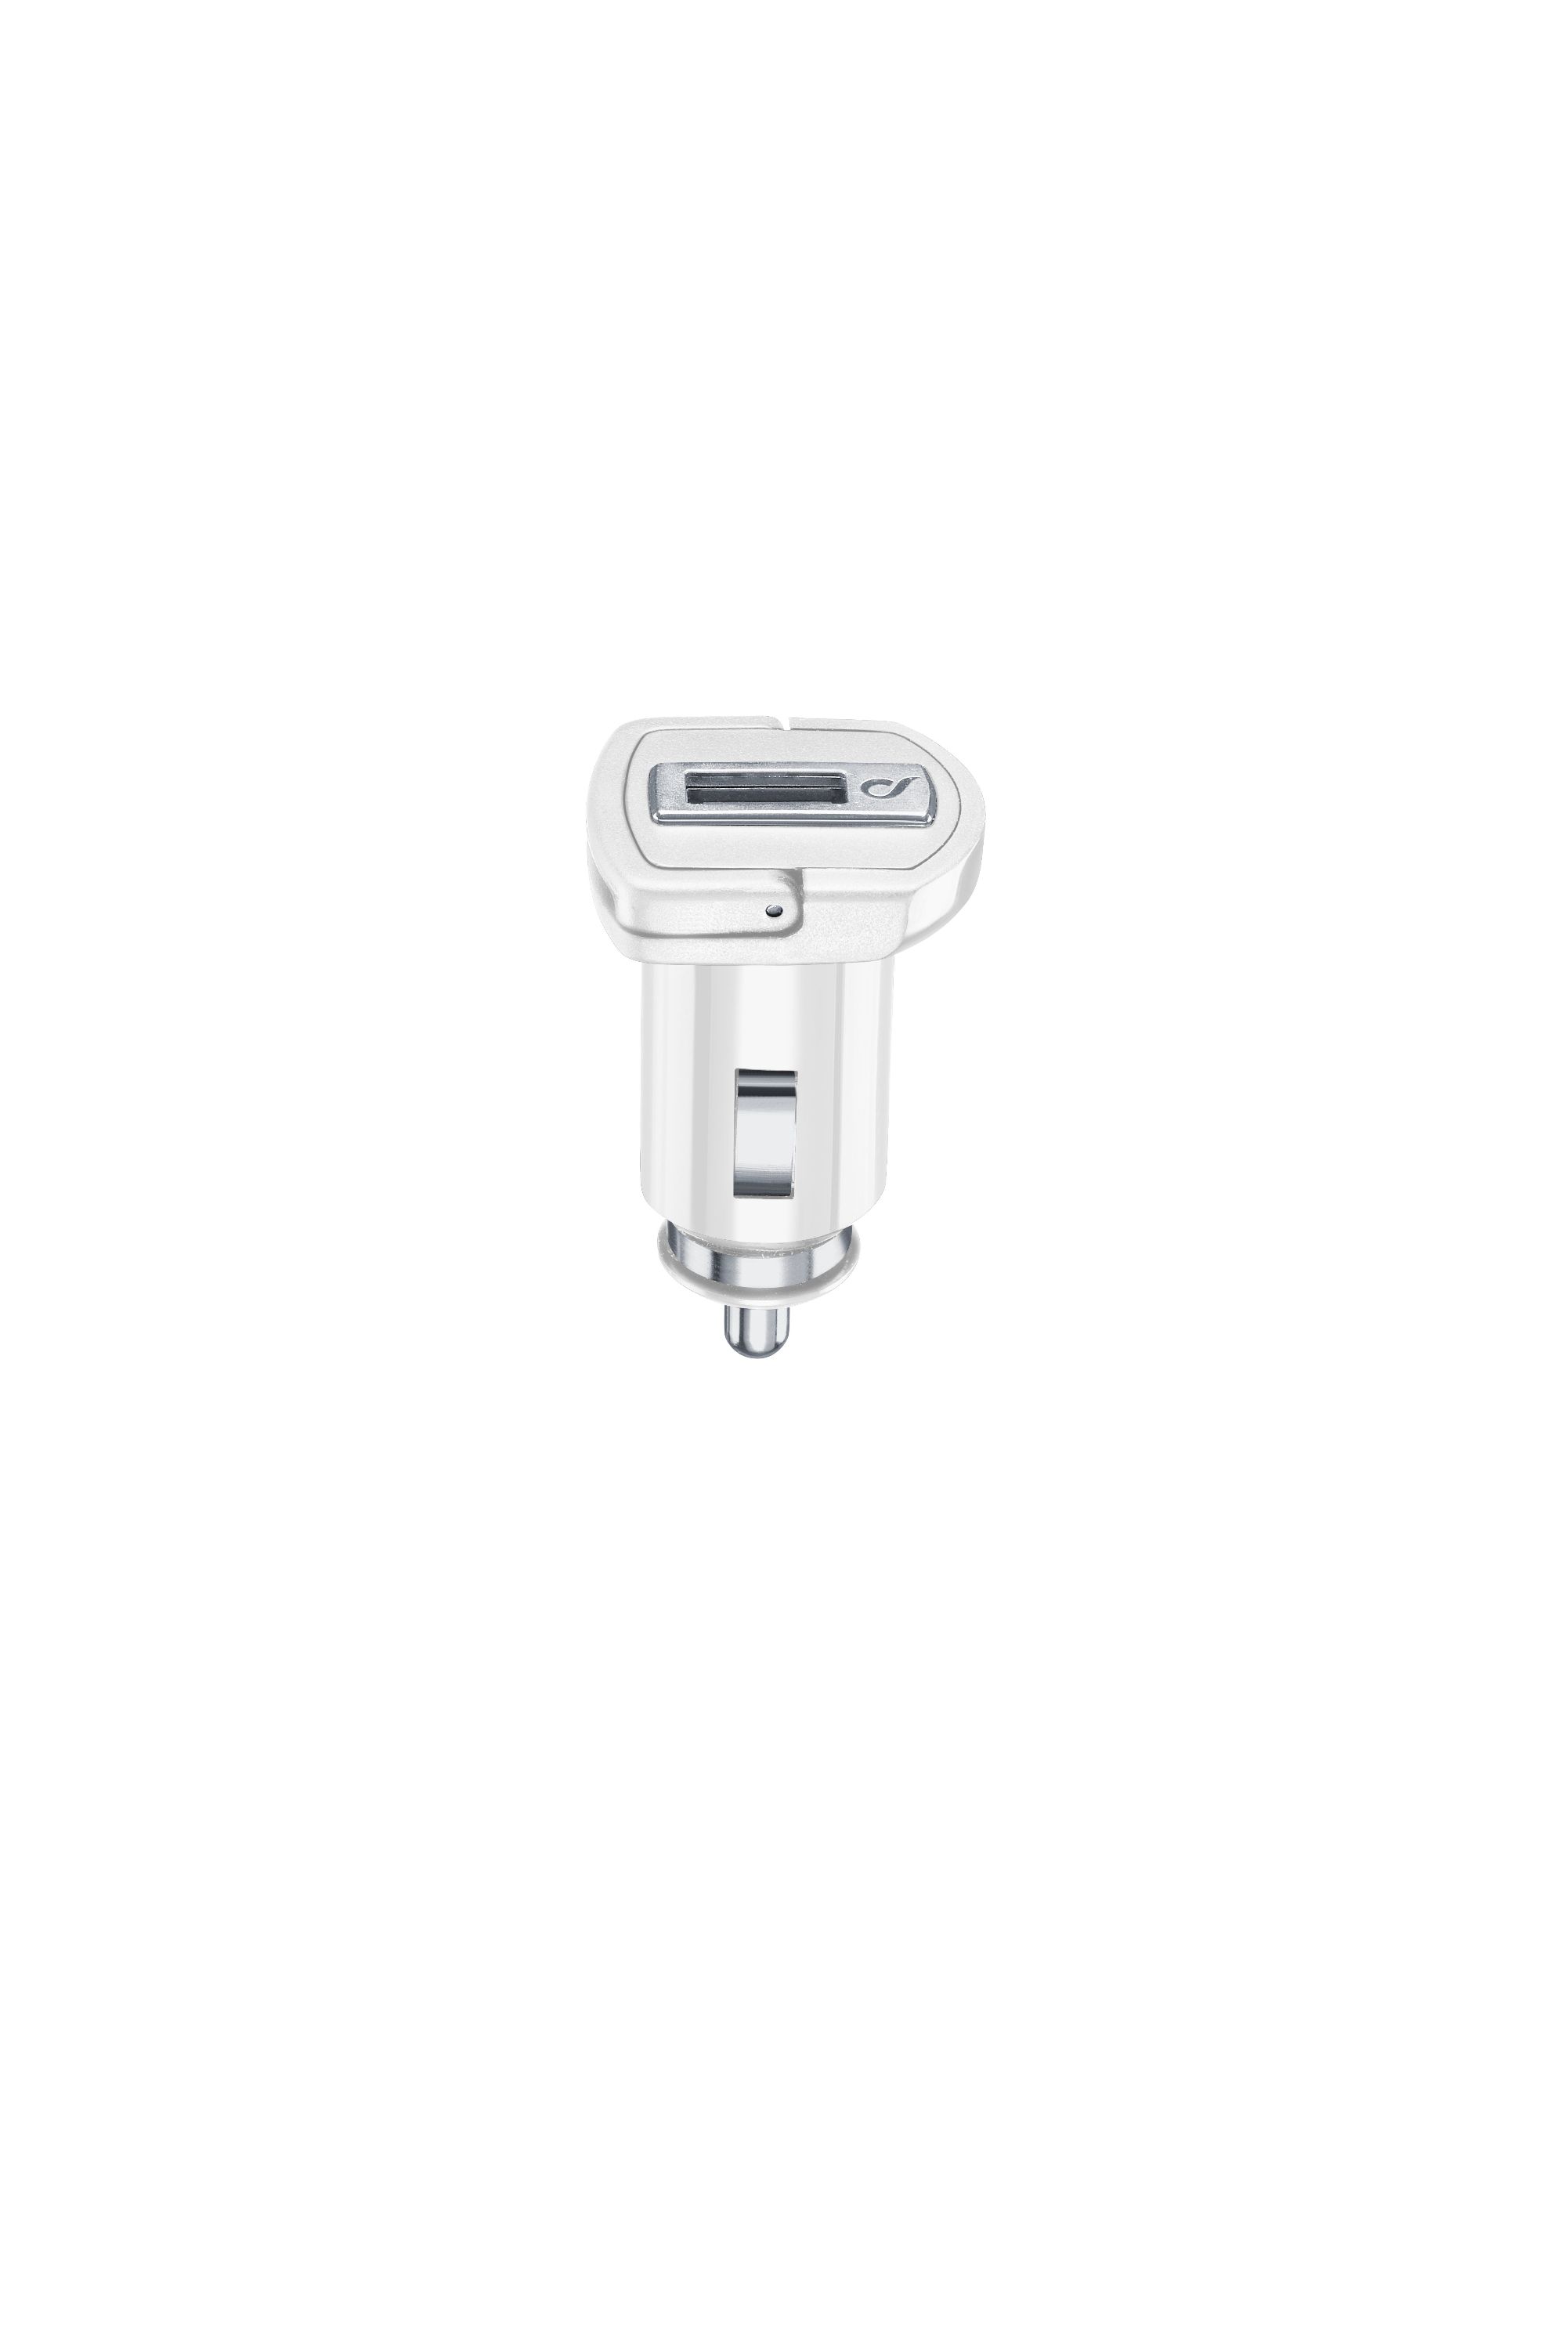 Car charger usb, 10W/2A Samsung, white